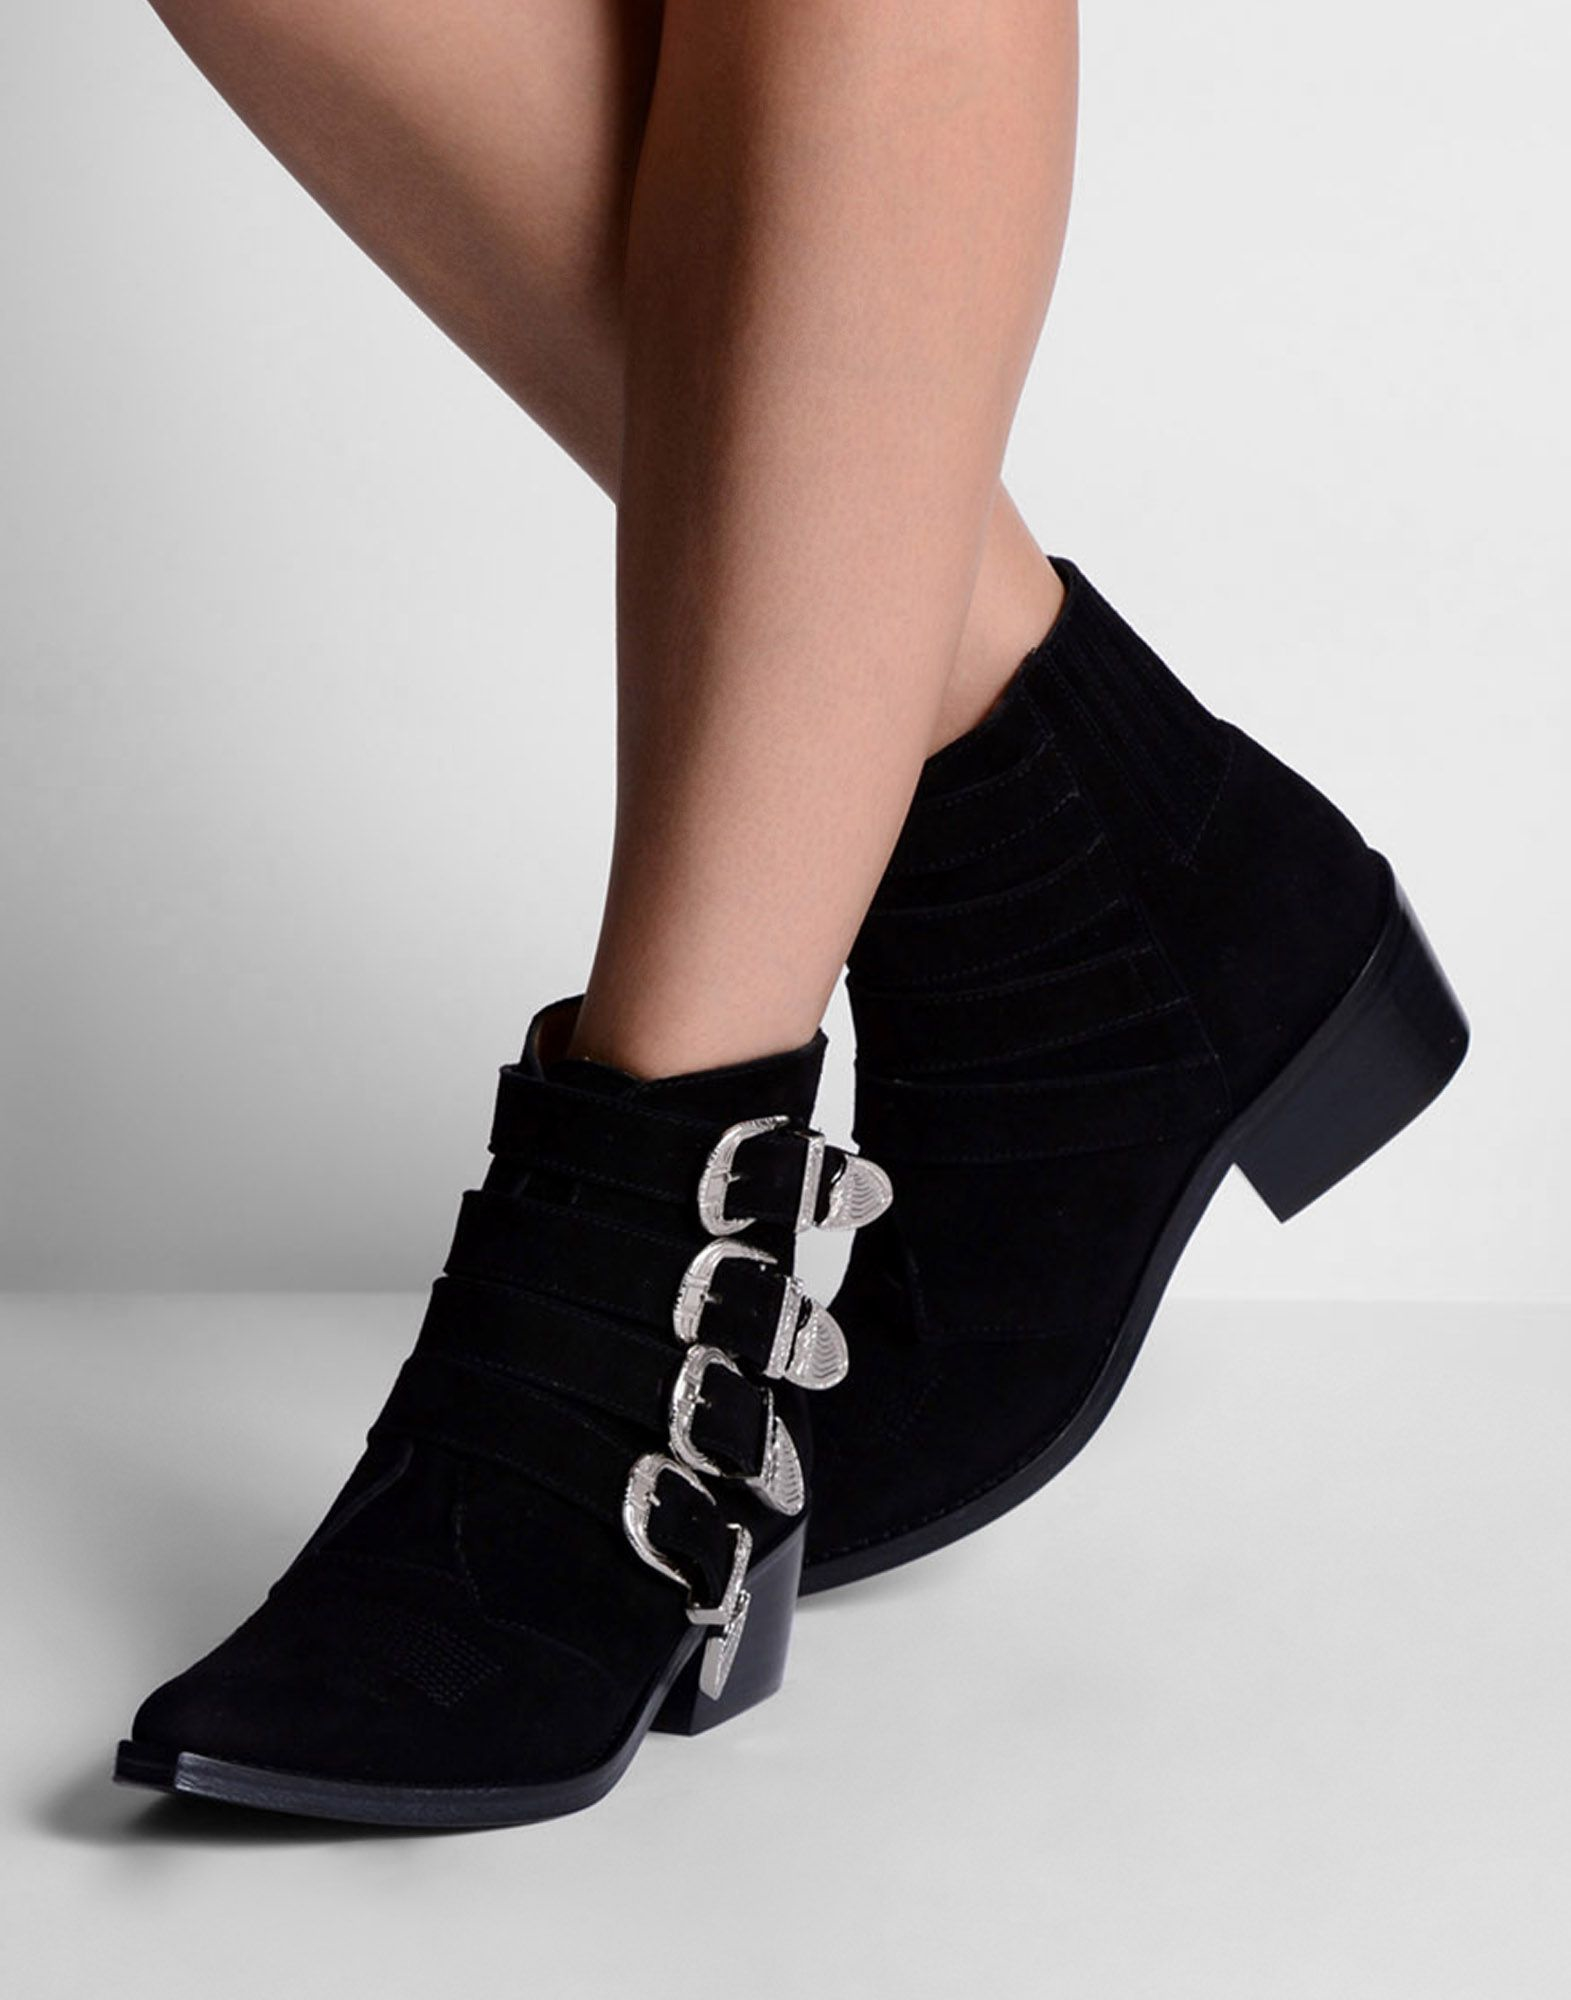 Toga pulla Buckled Leather Ankle Boots in Black | Lyst